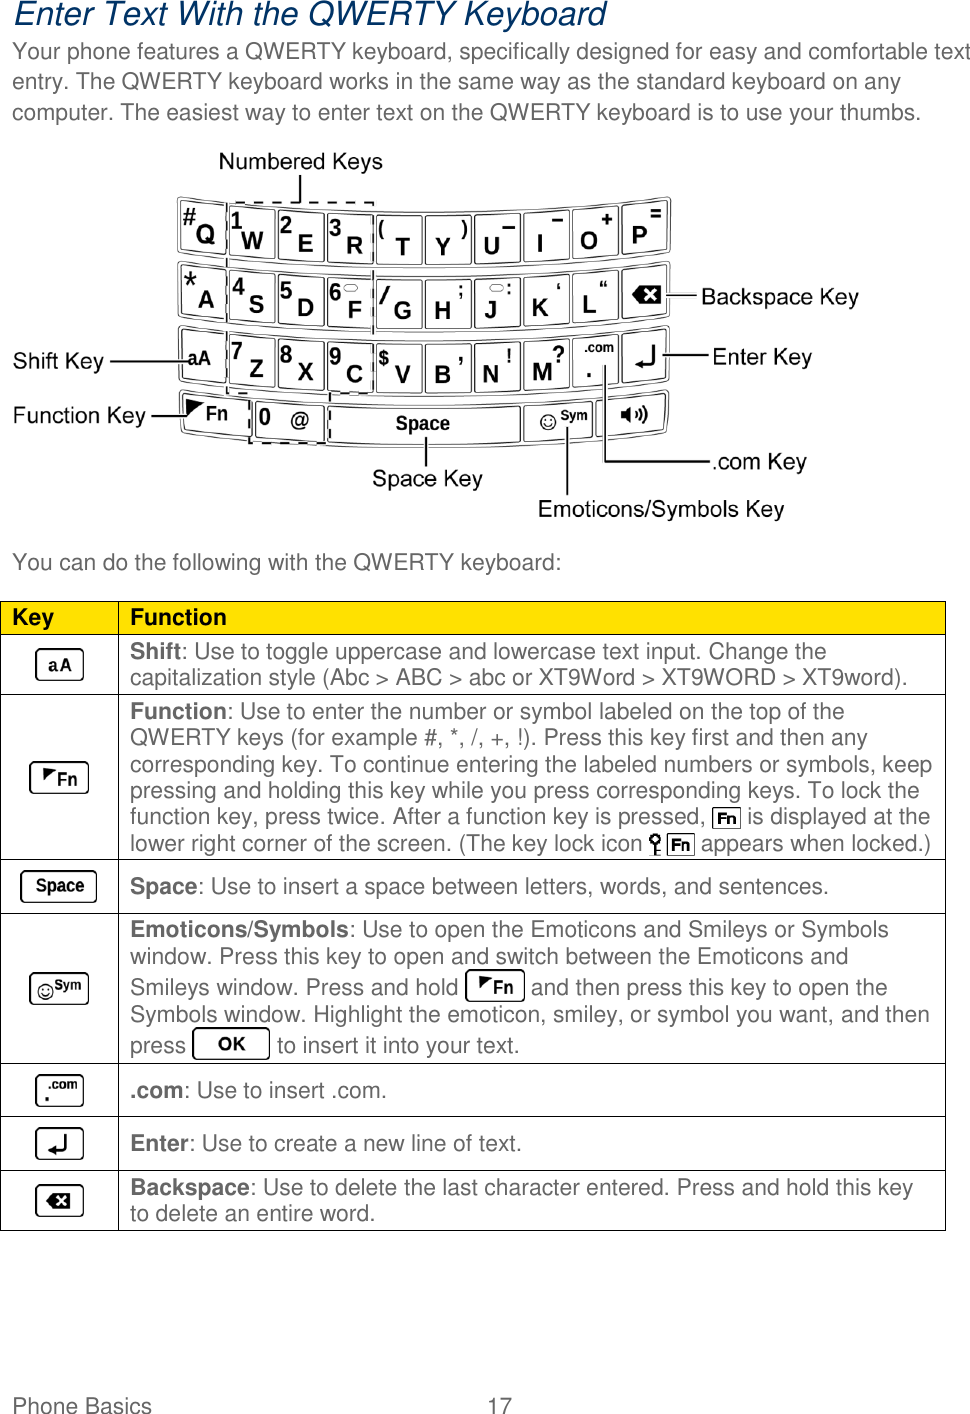 Phone Basics  17   Enter Text With the QWERTY Keyboard Your phone features a QWERTY keyboard, specifically designed for easy and comfortable text entry. The QWERTY keyboard works in the same way as the standard keyboard on any computer. The easiest way to enter text on the QWERTY keyboard is to use your thumbs.  You can do the following with the QWERTY keyboard: Key Function  Shift: Use to toggle uppercase and lowercase text input. Change the capitalization style (Abc &gt; ABC &gt; abc or XT9Word &gt; XT9WORD &gt; XT9word).  Function: Use to enter the number or symbol labeled on the top of the QWERTY keys (for example #, *, /, +, !). Press this key first and then any corresponding key. To continue entering the labeled numbers or symbols, keep pressing and holding this key while you press corresponding keys. To lock the function key, press twice. After a function key is pressed,   is displayed at the lower right corner of the screen. (The key lock icon   appears when locked.)  Space: Use to insert a space between letters, words, and sentences.  Emoticons/Symbols: Use to open the Emoticons and Smileys or Symbols window. Press this key to open and switch between the Emoticons and Smileys window. Press and hold   and then press this key to open the Symbols window. Highlight the emoticon, smiley, or symbol you want, and then press   to insert it into your text.  .com: Use to insert .com.  Enter: Use to create a new line of text.  Backspace: Use to delete the last character entered. Press and hold this key to delete an entire word.  